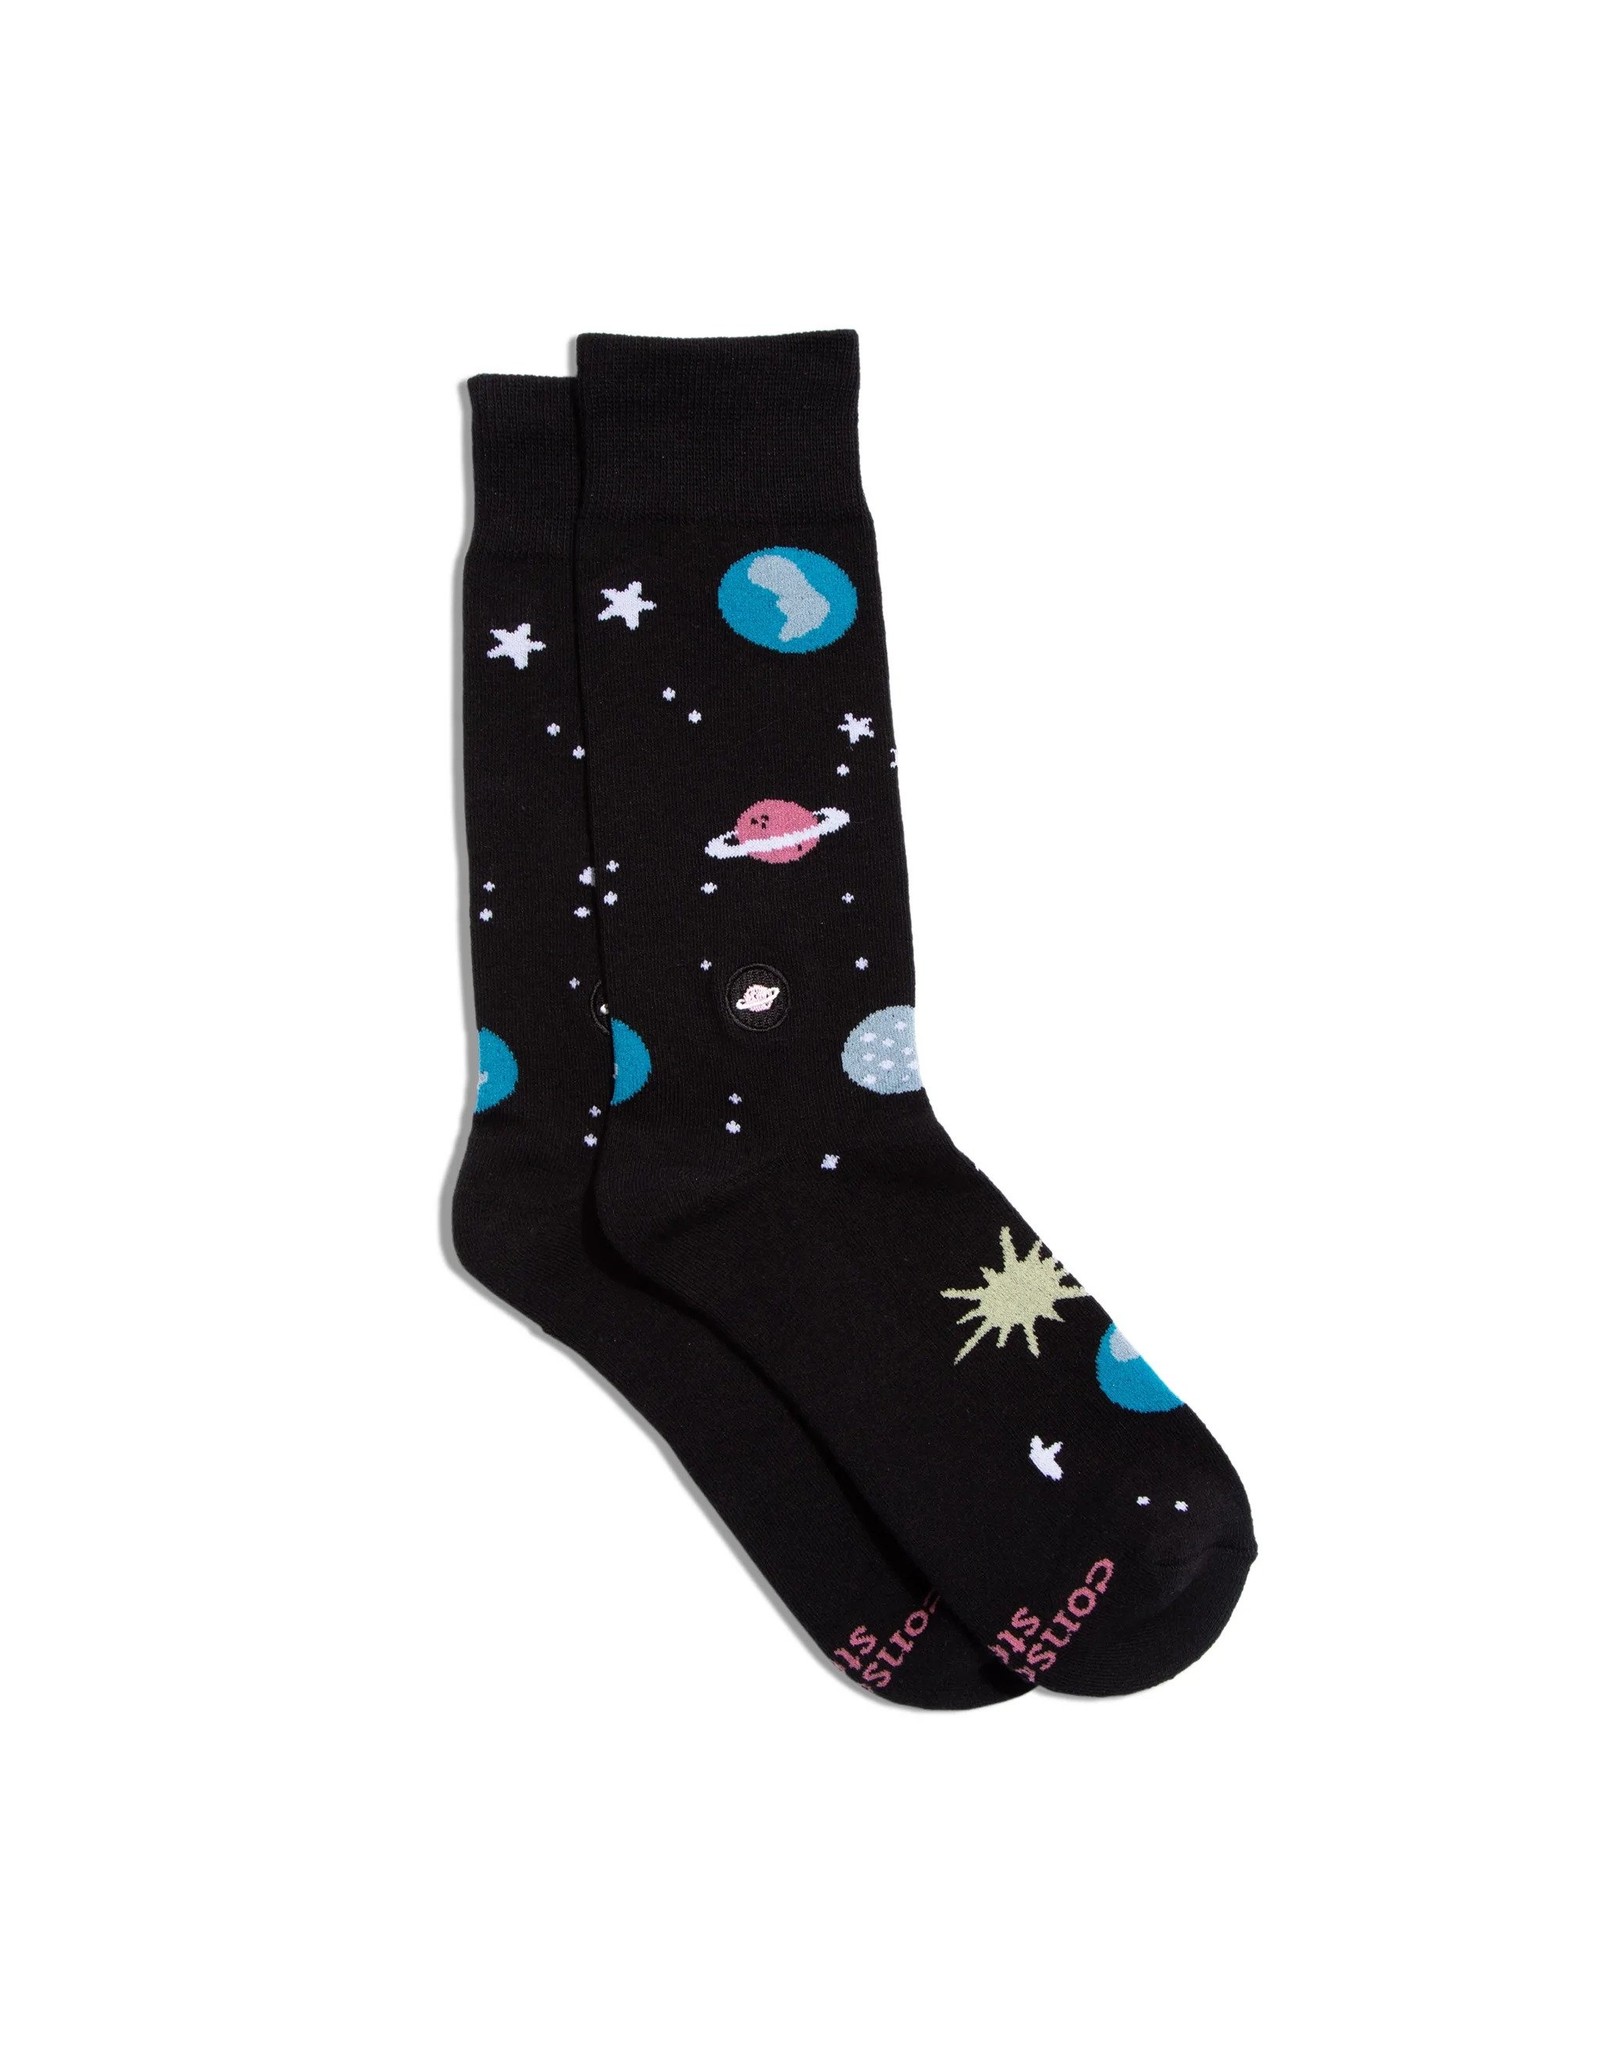 Trade roots Socks that Support Space Exploration